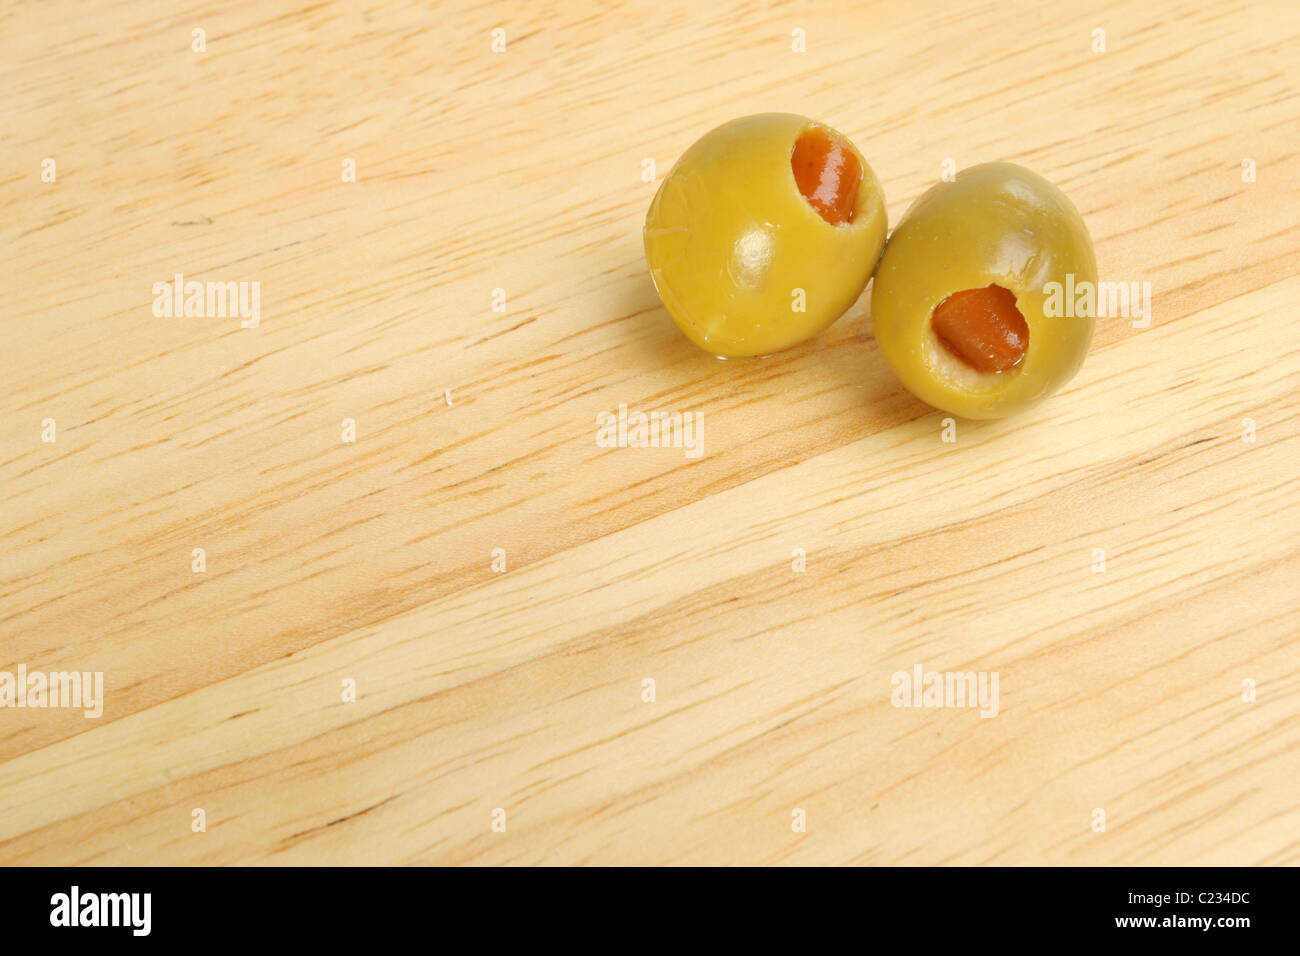 Two stuffed olives on a background of the grain of a wooden board Stock Photo